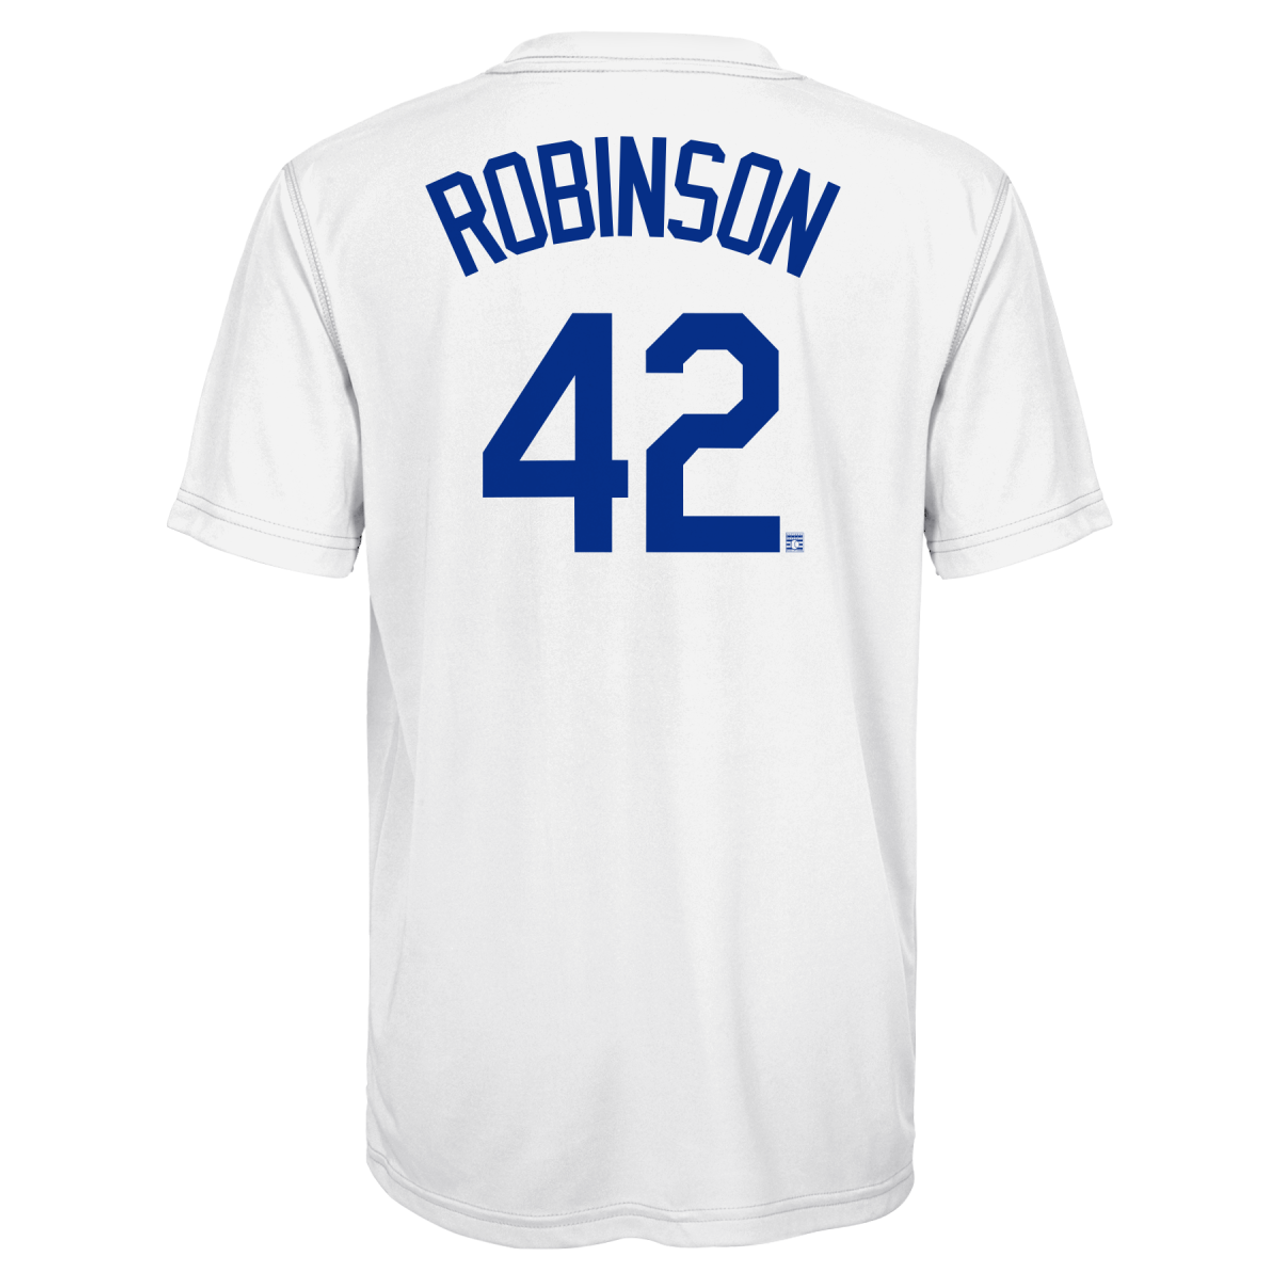 Jackie Robinson Jerseys and T-Shirts for Adults and Kids